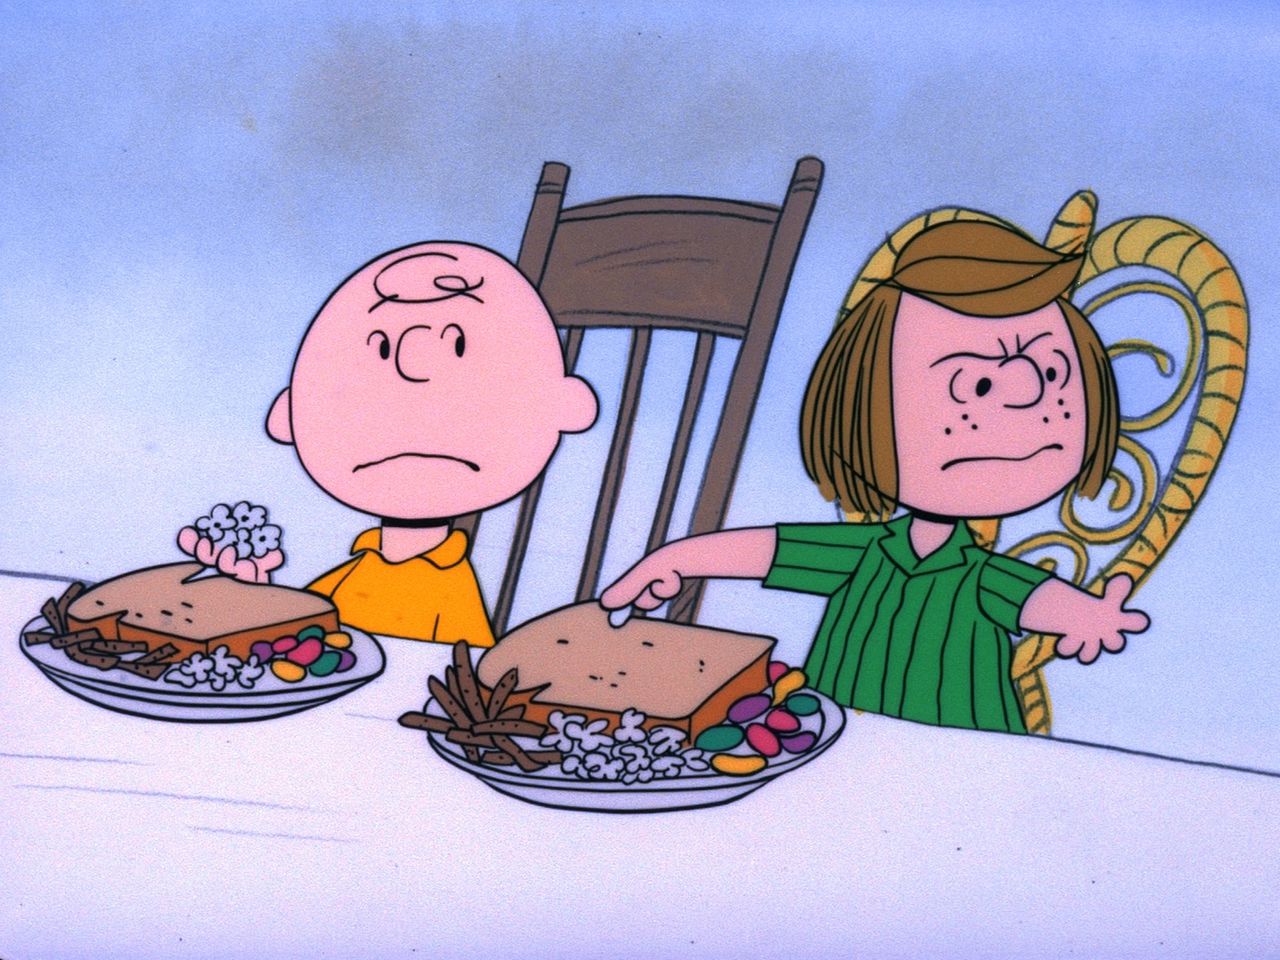 CHARLIE BROWN WORRIES AS PEPPERMINT PATTY COMPLAINS ABOUT THE MEAL